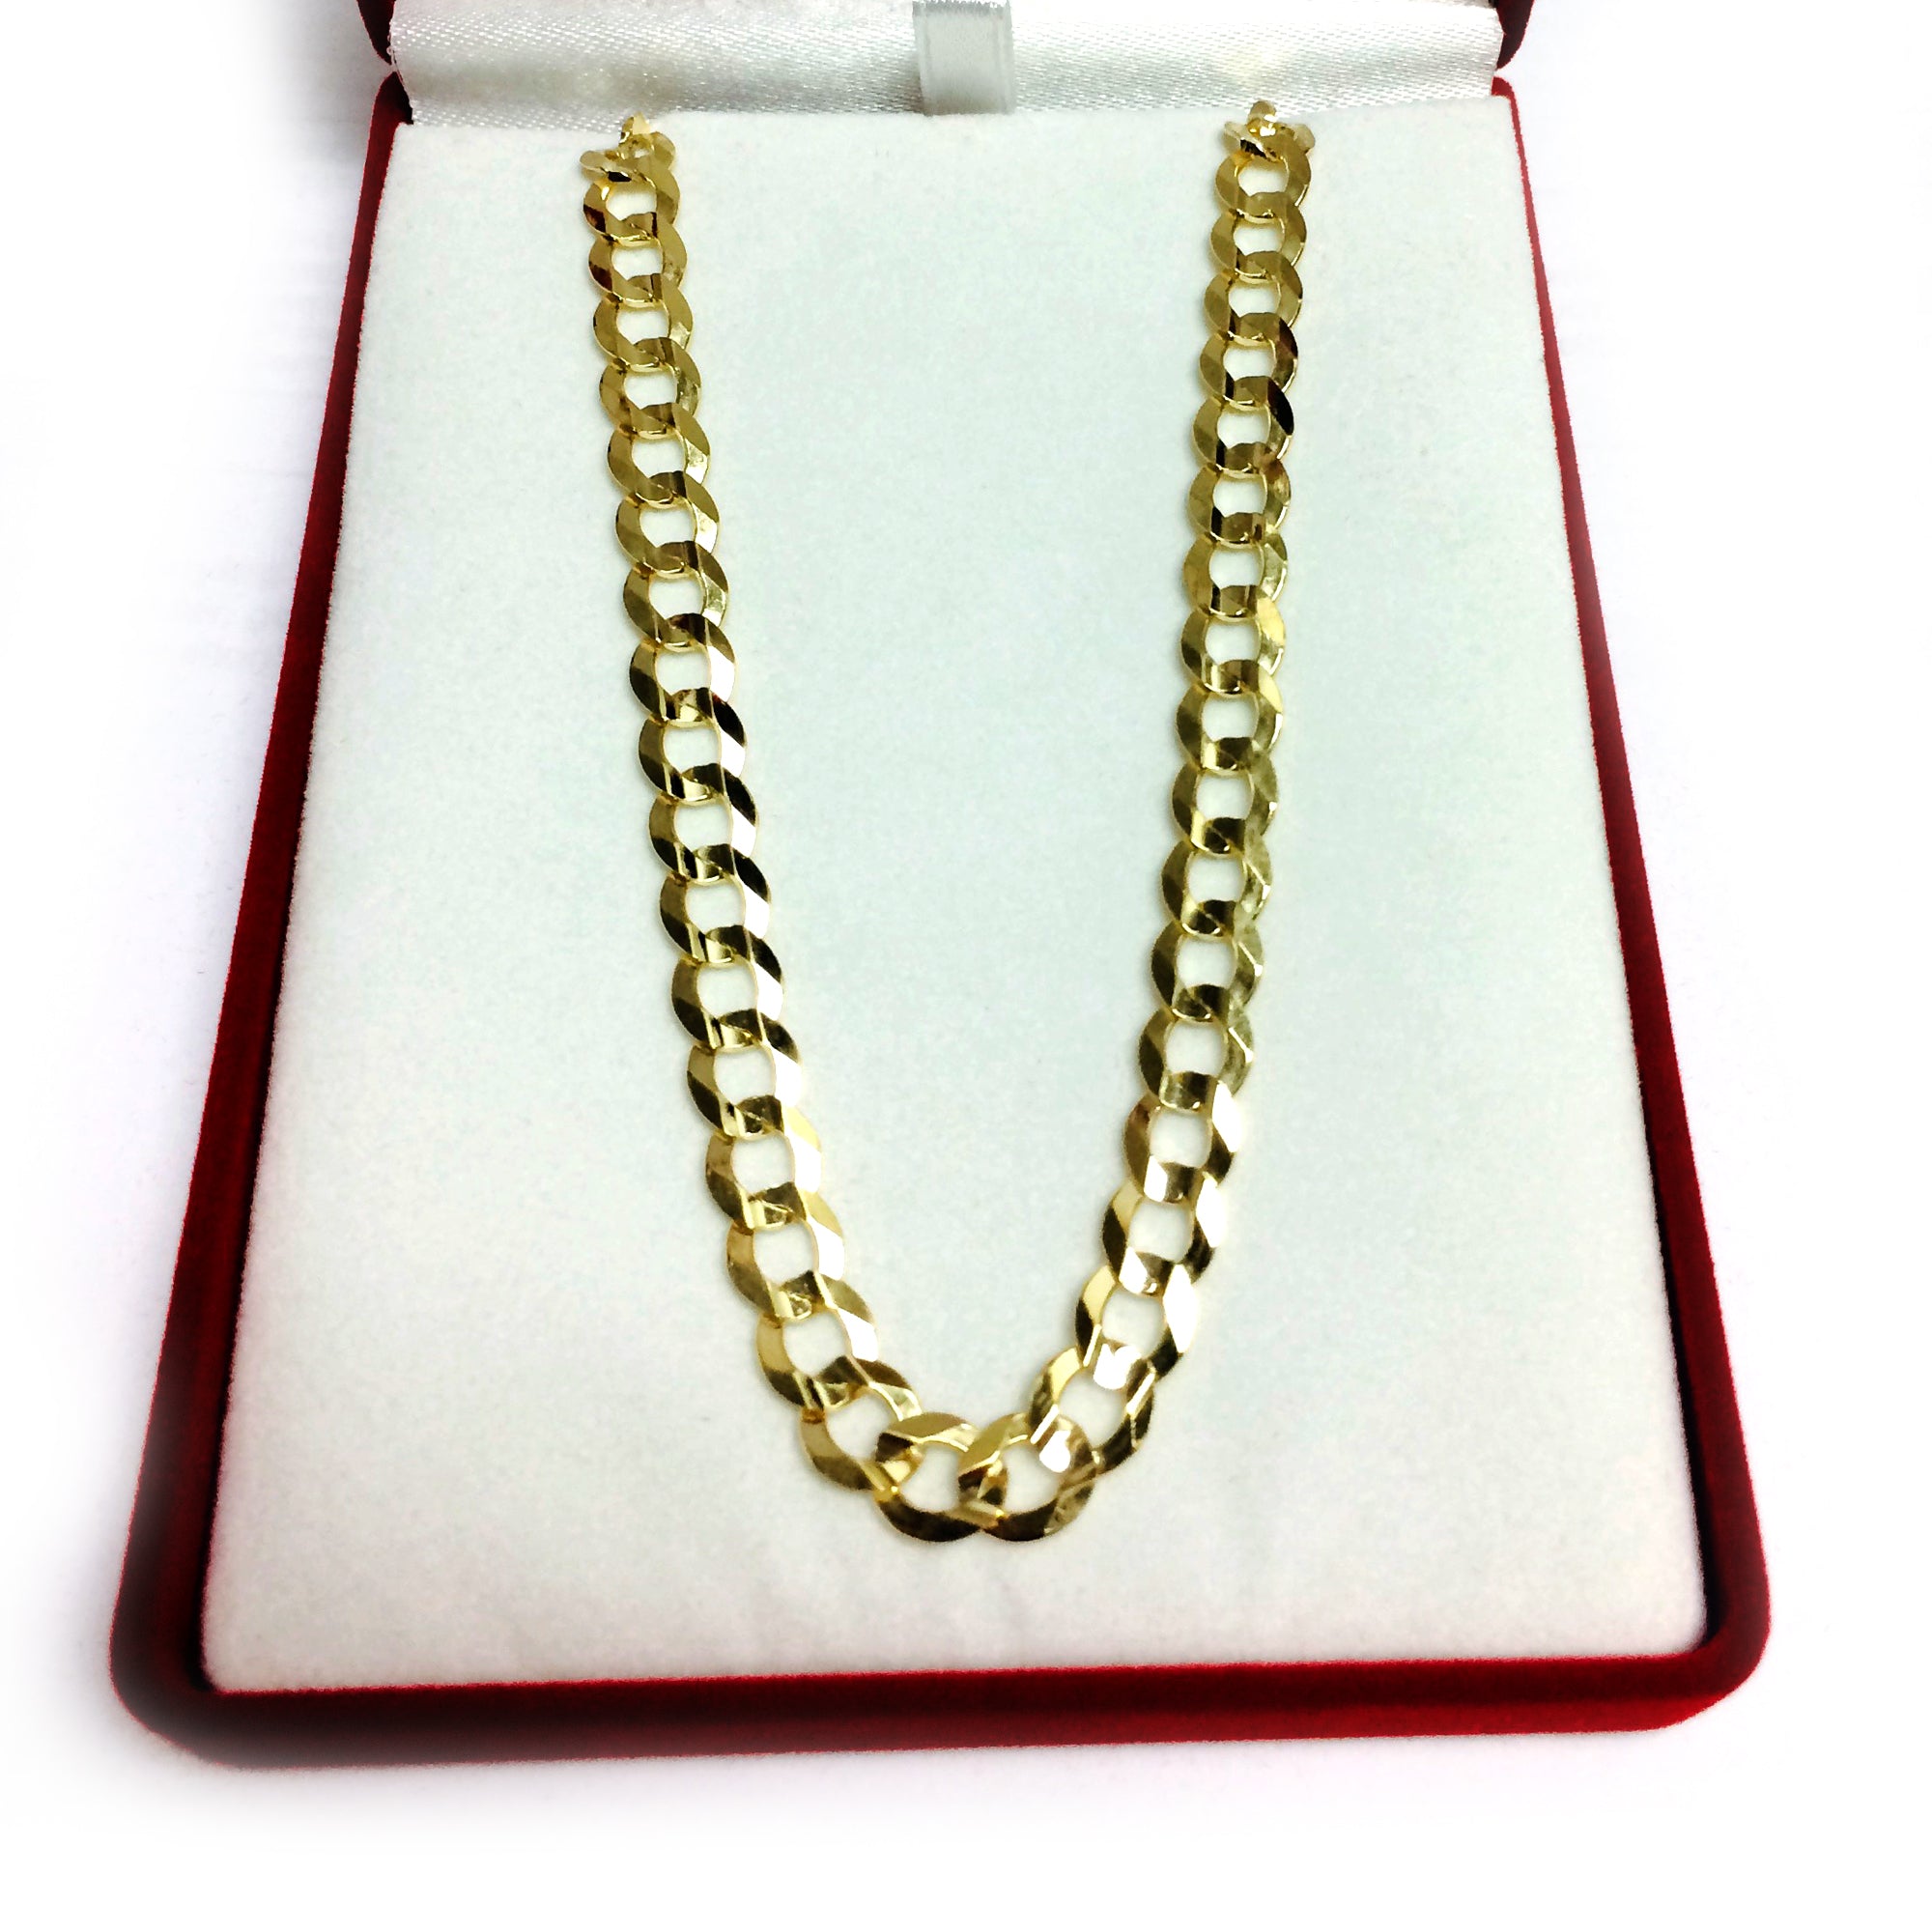 10k Yellow Gold Comfort Curb Chain Necklace, 7.0mm fine designer jewelry for men and women